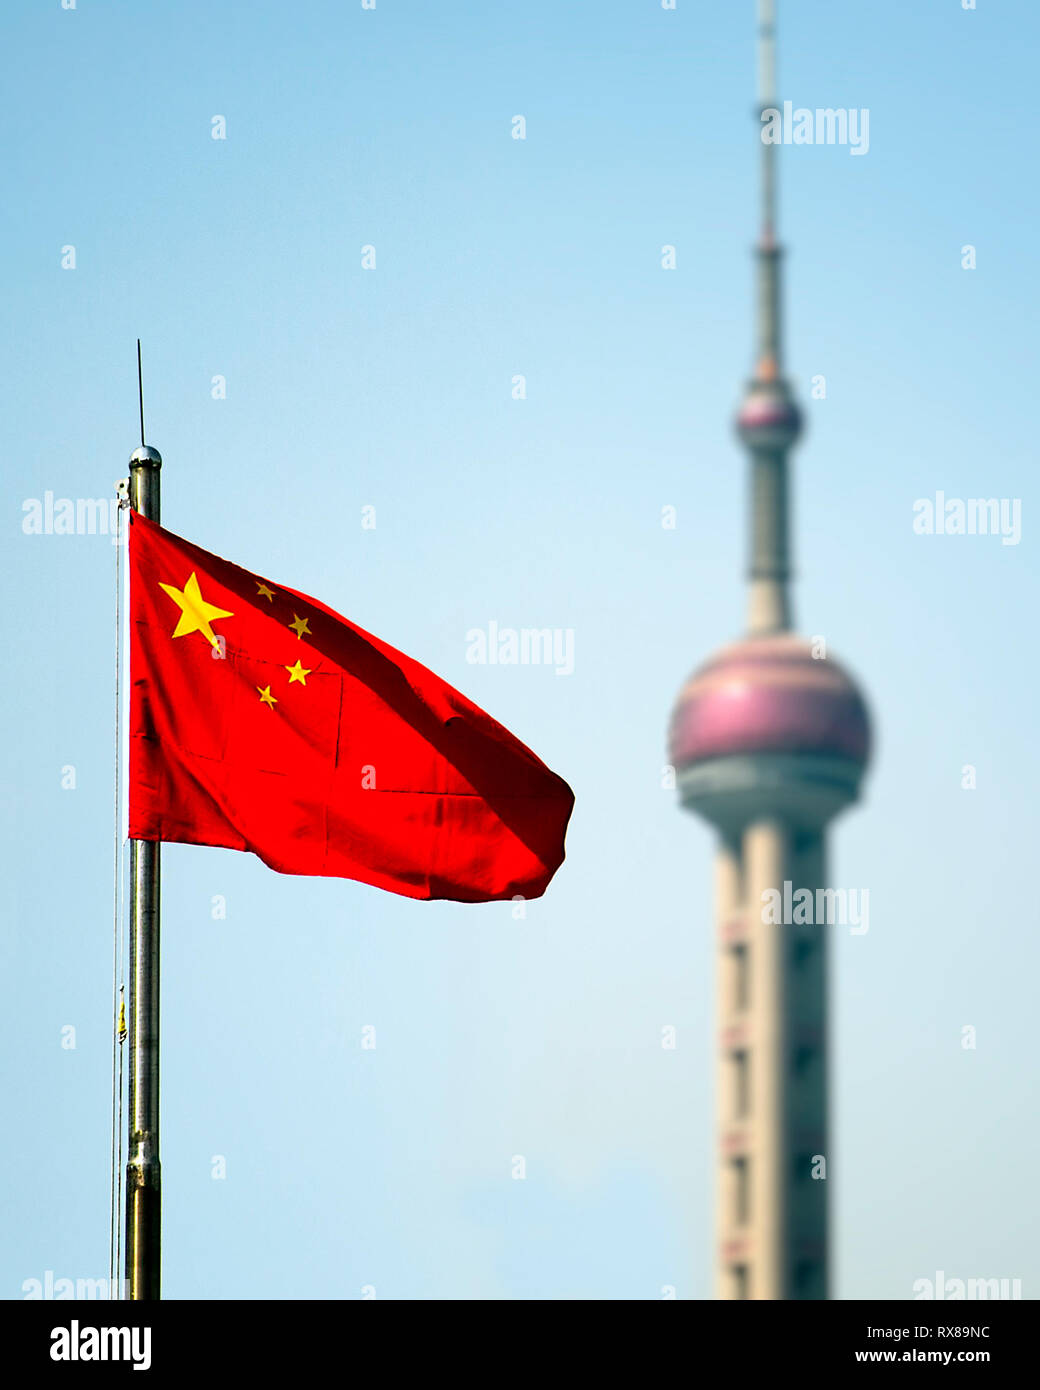 The Chinese flag blows in the wind. Behind it the Oriental Pearl Tower a landmark structure of Shanghai. Pudong, Shanhai, China. Stock Photo